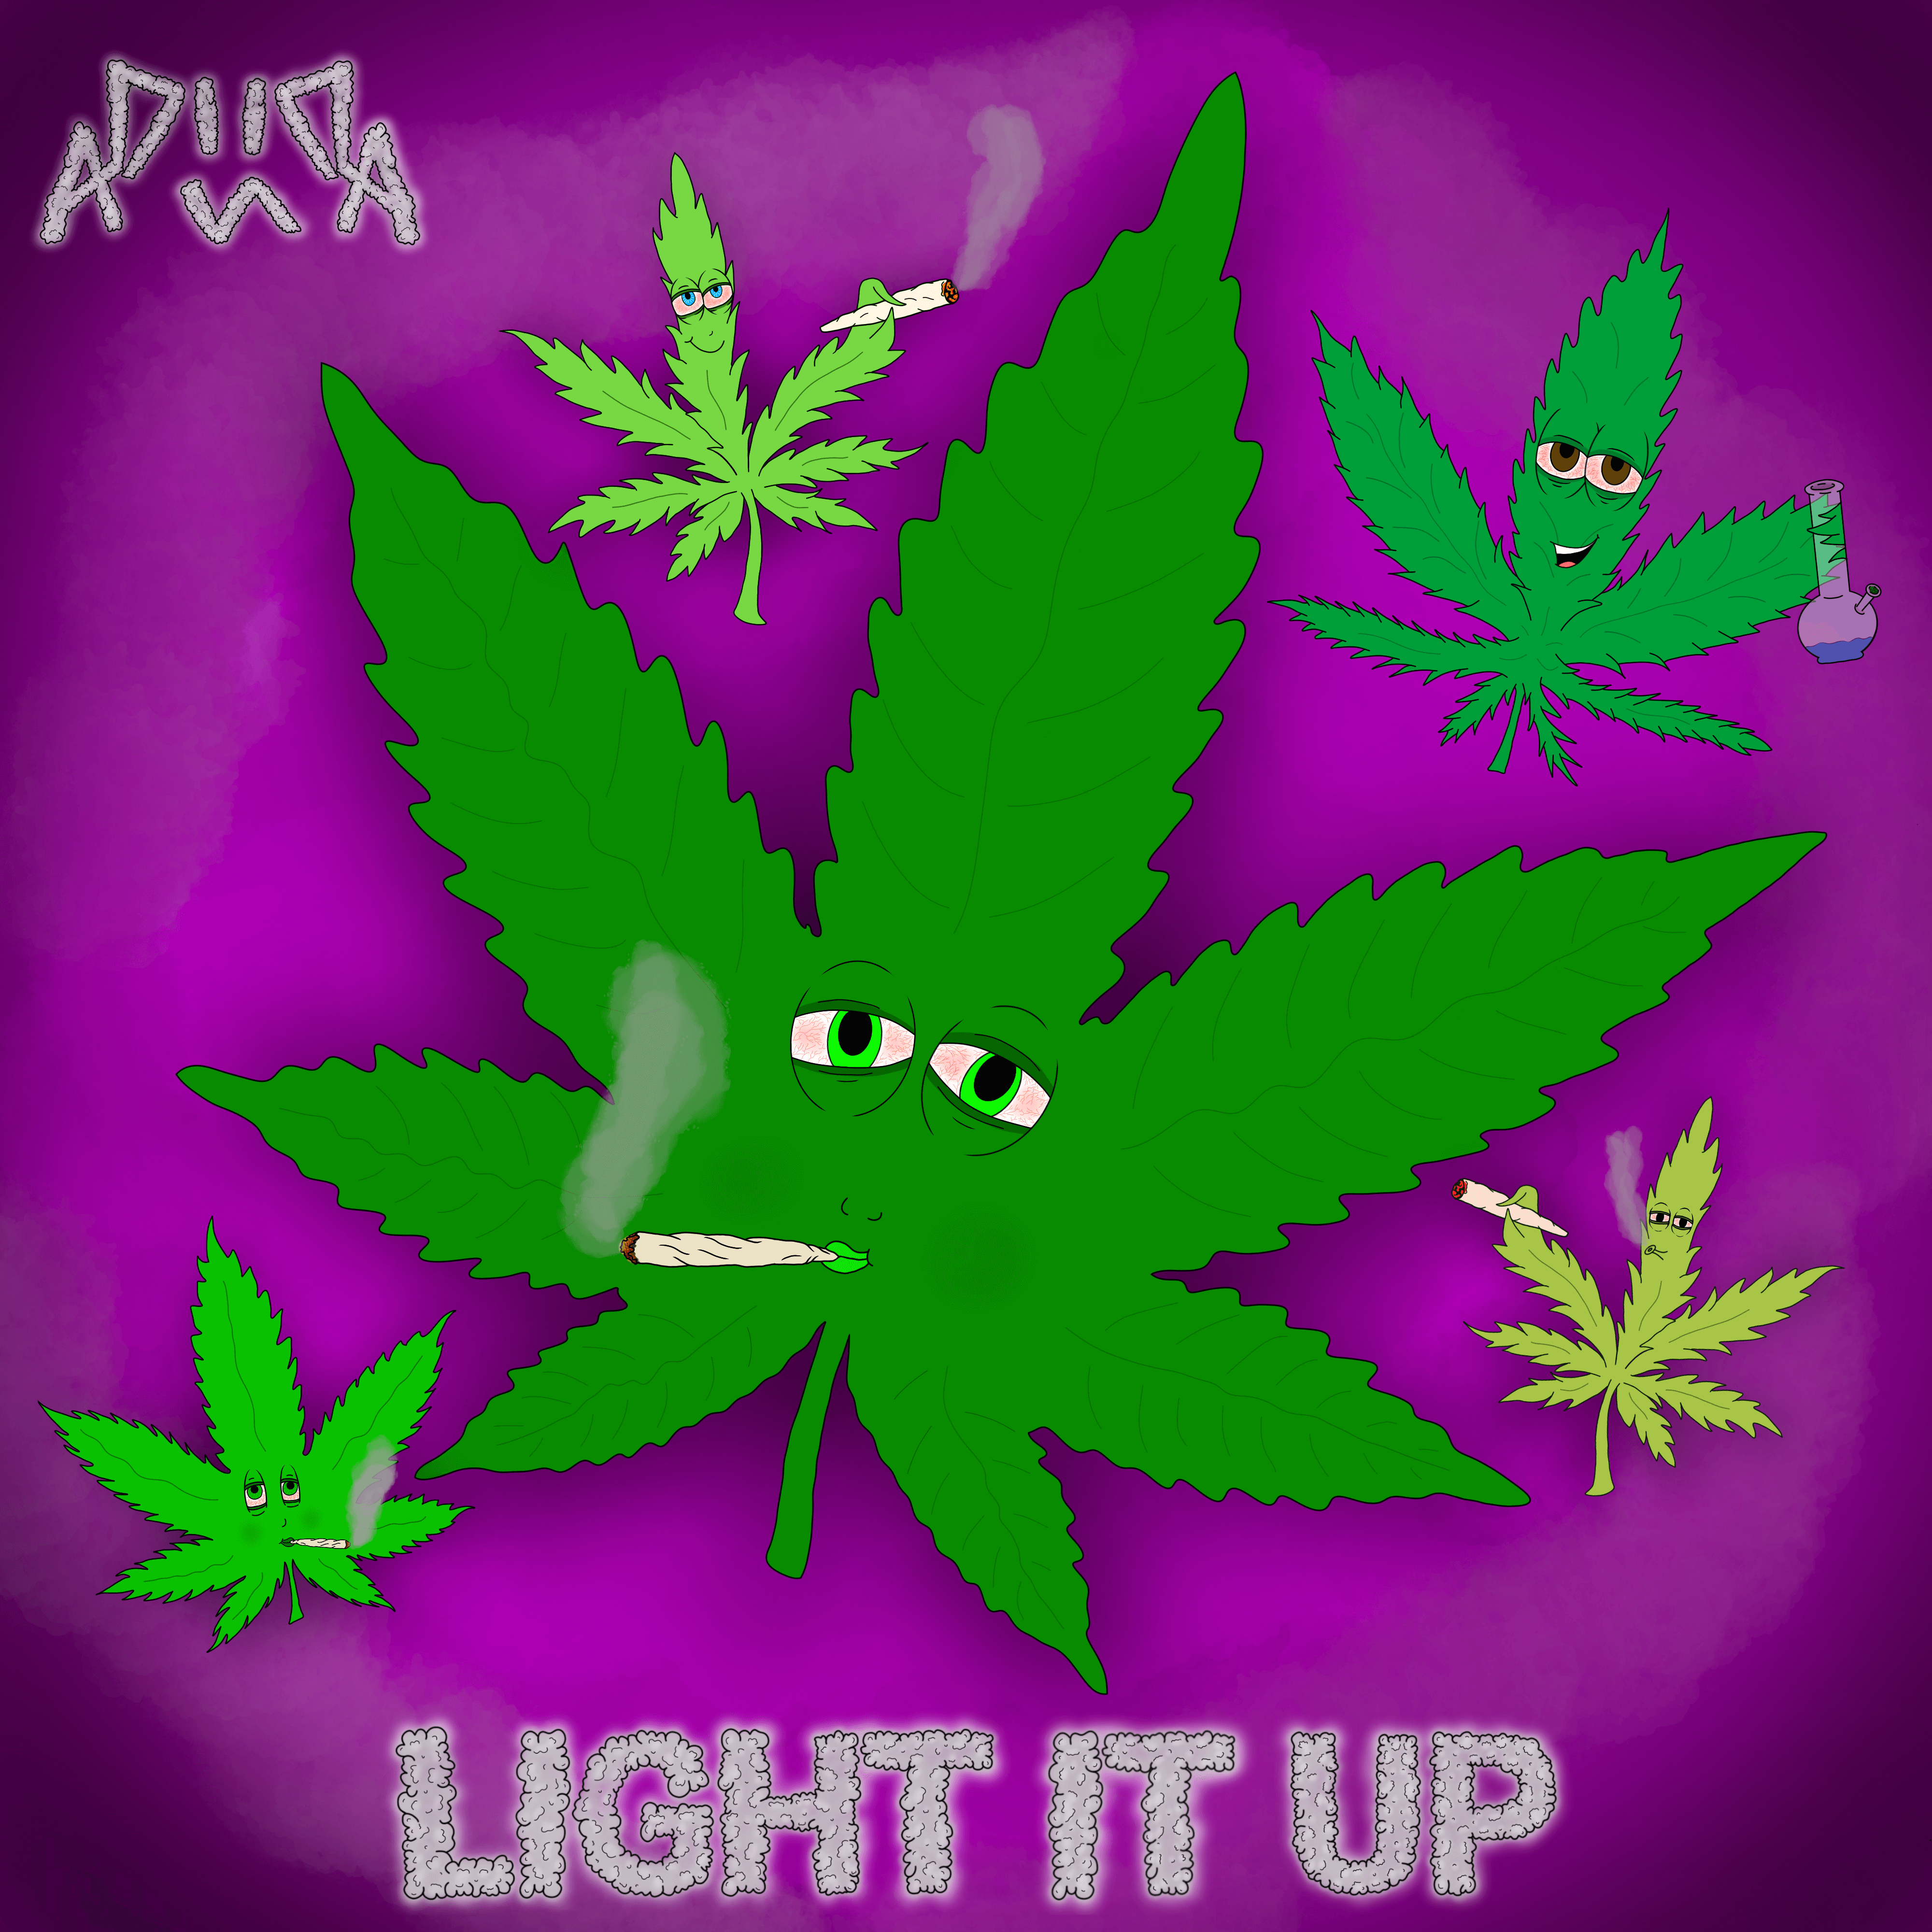 4/20 Starts Early With Adiidas’ ‘Light It Up’ [Premiere]